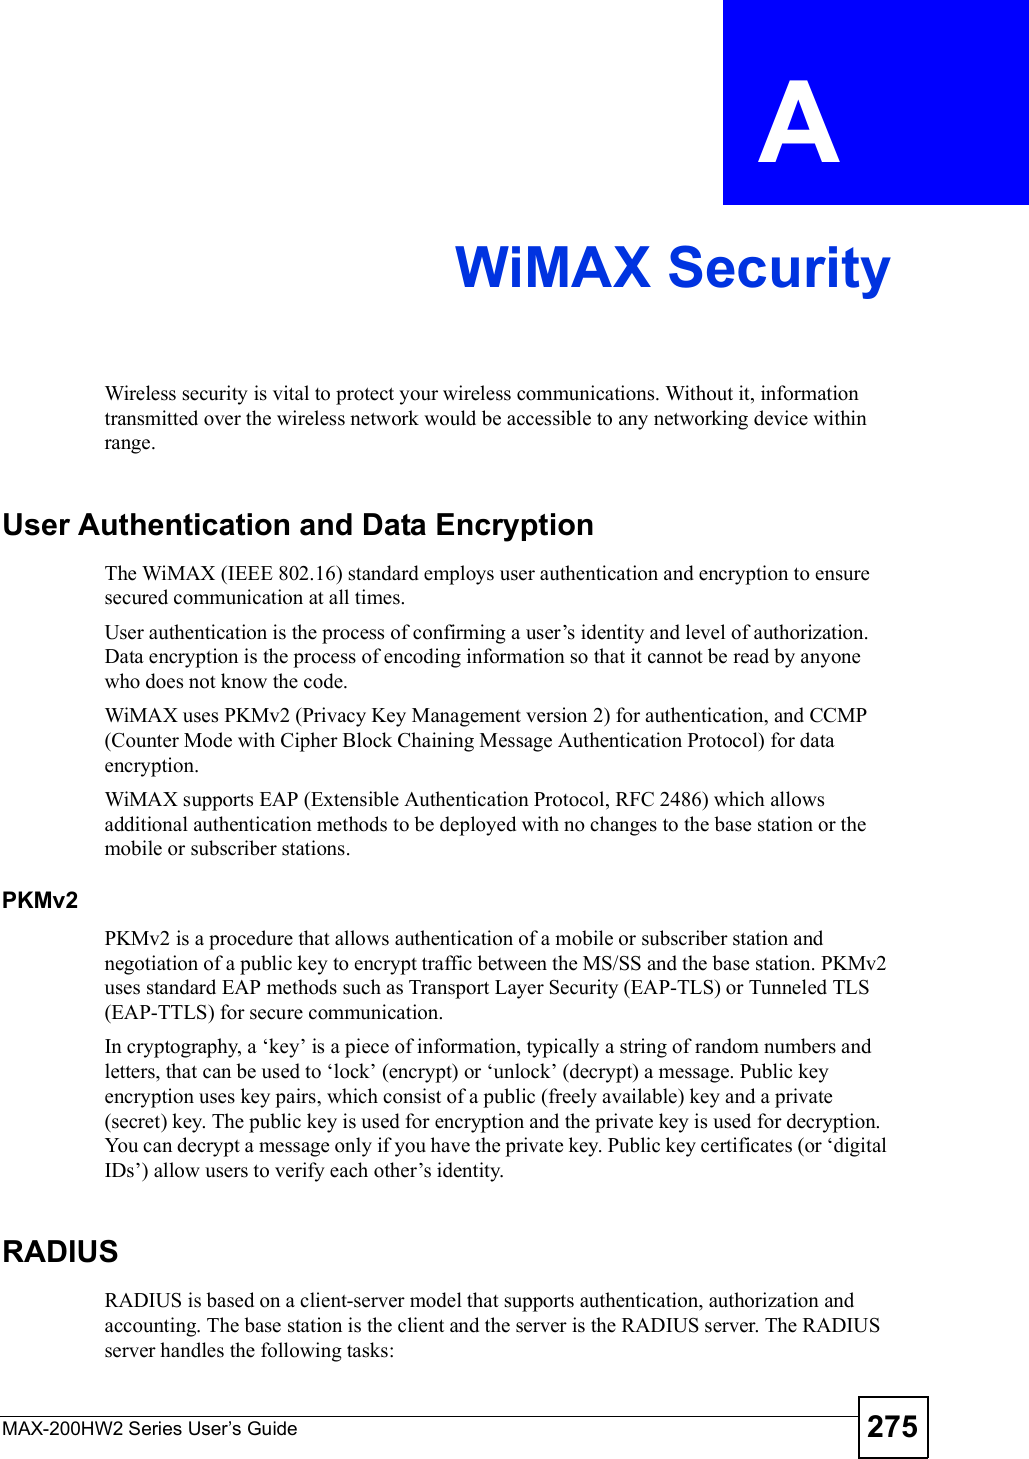 MAX-200HW2 Series User s Guide 275APPENDIX  A WiMAX SecurityWireless security is vital to protect your wireless communications. Without it, information transmitted over the wireless network would be accessible to any networking device within range.User Authentication and Data EncryptionThe WiMAX (IEEE 802.16) standard employs user authentication and encryption to ensure secured communication at all times.User authentication is the process of confirming a user!s identity and level of authorization. Data encryption is the process of encoding information so that it cannot be read by anyone who does not know the code. WiMAX uses PKMv2 (Privacy Key Management version 2) for authentication, and CCMP (Counter Mode with Cipher Block Chaining Message Authentication Protocol) for data encryption.WiMAX supports EAP (Extensible Authentication Protocol, RFC 2486) which allows additional authentication methods to be deployed with no changes to the base station or the mobile or subscriber stations.PKMv2PKMv2 is a procedure that allows authentication of a mobile or subscriber station and negotiation of a public key to encrypt traffic between the MS/SS and the base station. PKMv2 uses standard EAP methods such as Transport Layer Security (EAP-TLS) or Tunneled TLS (EAP-TTLS) for secure communication. In cryptography, a $key! is a piece of information, typically a string of random numbers and letters, that can be used to $lock! (encrypt) or $unlock! (decrypt) a message. Public key encryption uses key pairs, which consist of a public (freely available) key and a private (secret) key. The public key is used for encryption and the private key is used for decryption. You can decrypt a message only if you have the private key. Public key certificates (or $digital IDs!) allow users to verify each other!s identity. RADIUSRADIUS is based on a client-server model that supports authentication, authorization and accounting. The base station is the client and the server is the RADIUS server. The RADIUS server handles the following tasks: